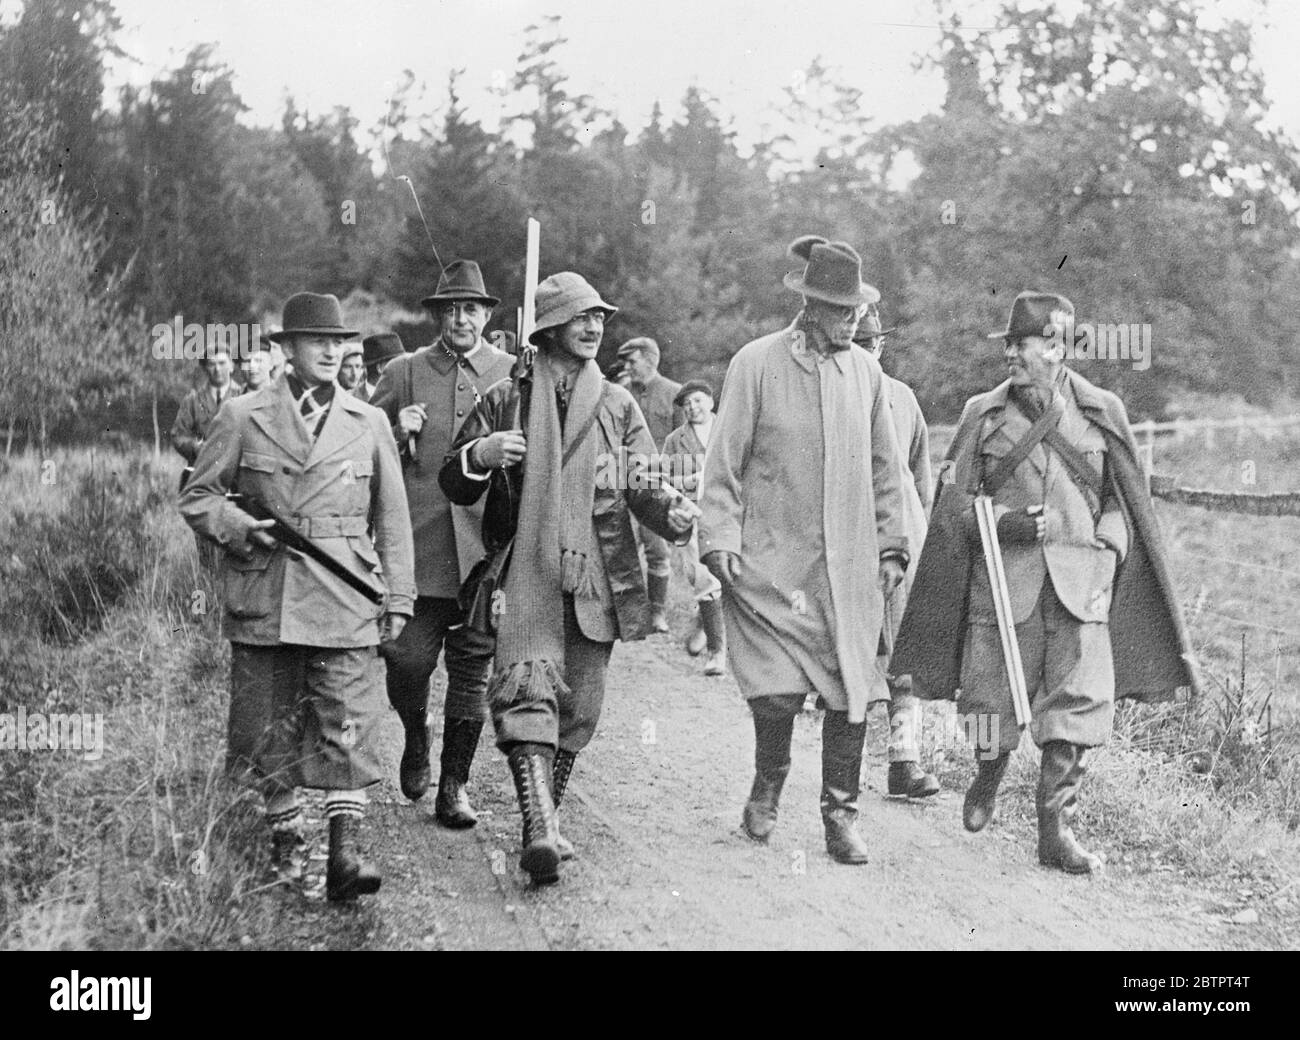 King Gustav goes hunting. King Gustav of Sweden took part in the autumn hunt at Berga, the estate of Royal Forester Helge Ax;son Johnson, near Stockholm. There was a good bag of deer, roes and hares. Photo shows, the Royal party on the way to the woods for the hunt. King Gustav is seen second from right, accompanied by Duke D'Otrante, Hjalmar Casserman and Admiral Fabian Tamm. 20 October 1937 Stock Photo